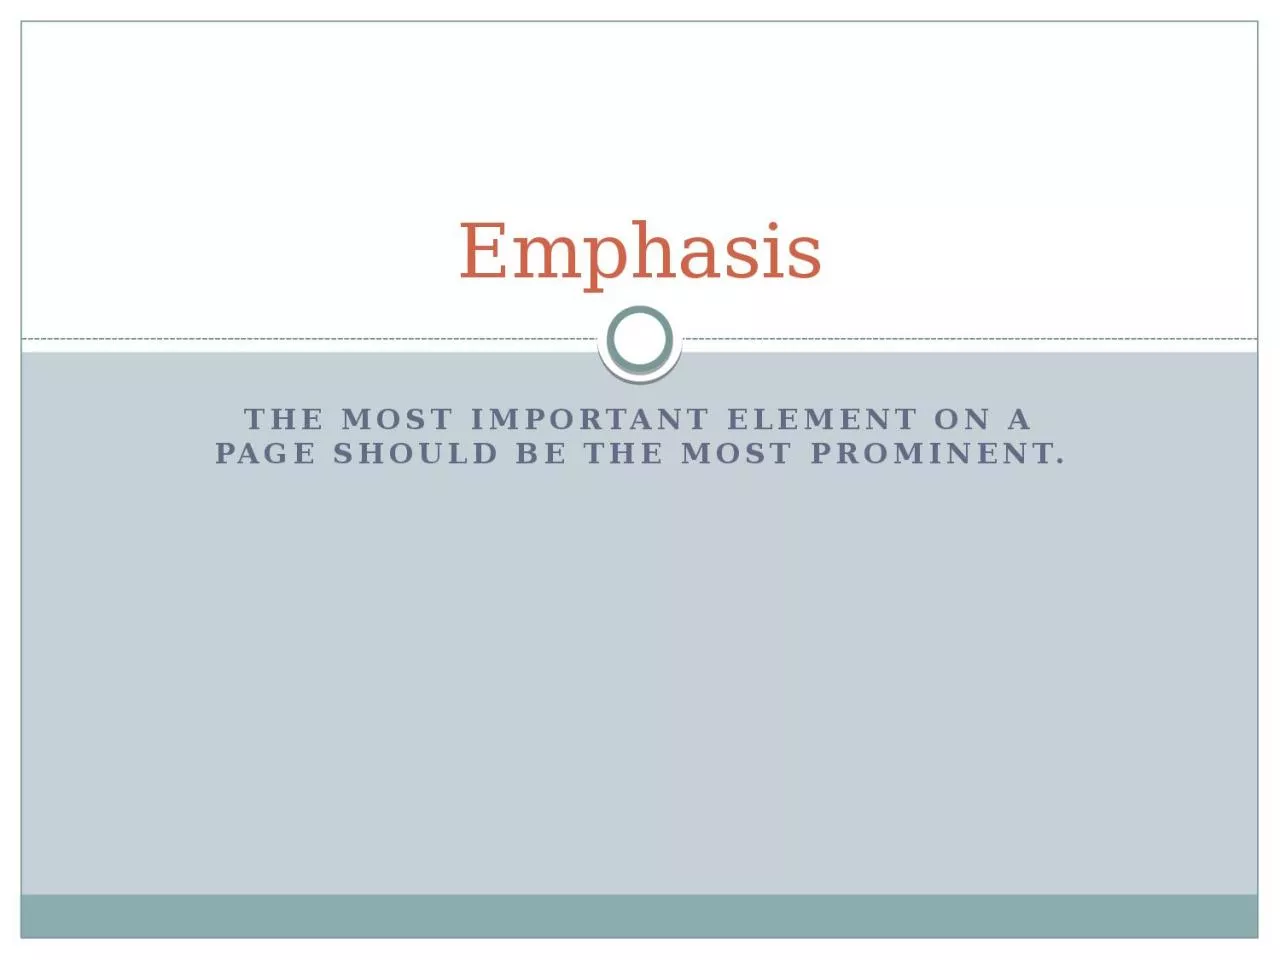 The Most important element on a page should be the most prominent.